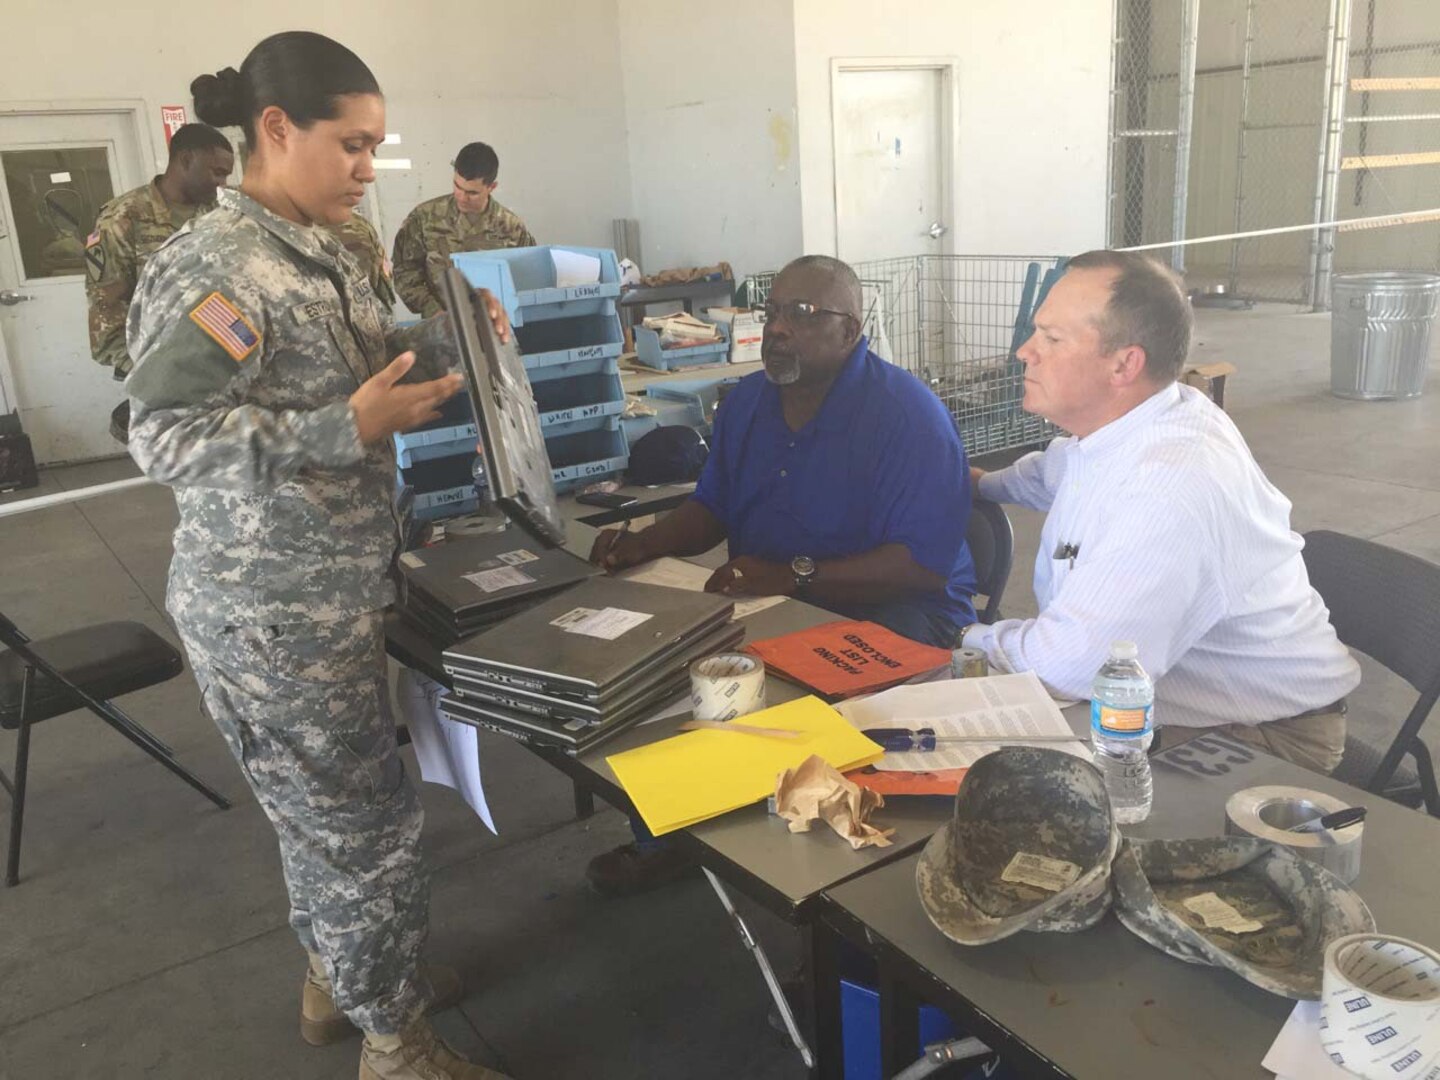 A soldier presents property to Wayne Willis (left), who was on hand at Foot Hood, Texas, from the DLA Disposition Services at Fort Sill, Oklahoma, while Peter Bechtel (right), from the Army’s office of Supply Policy and Programs, observes the process. 